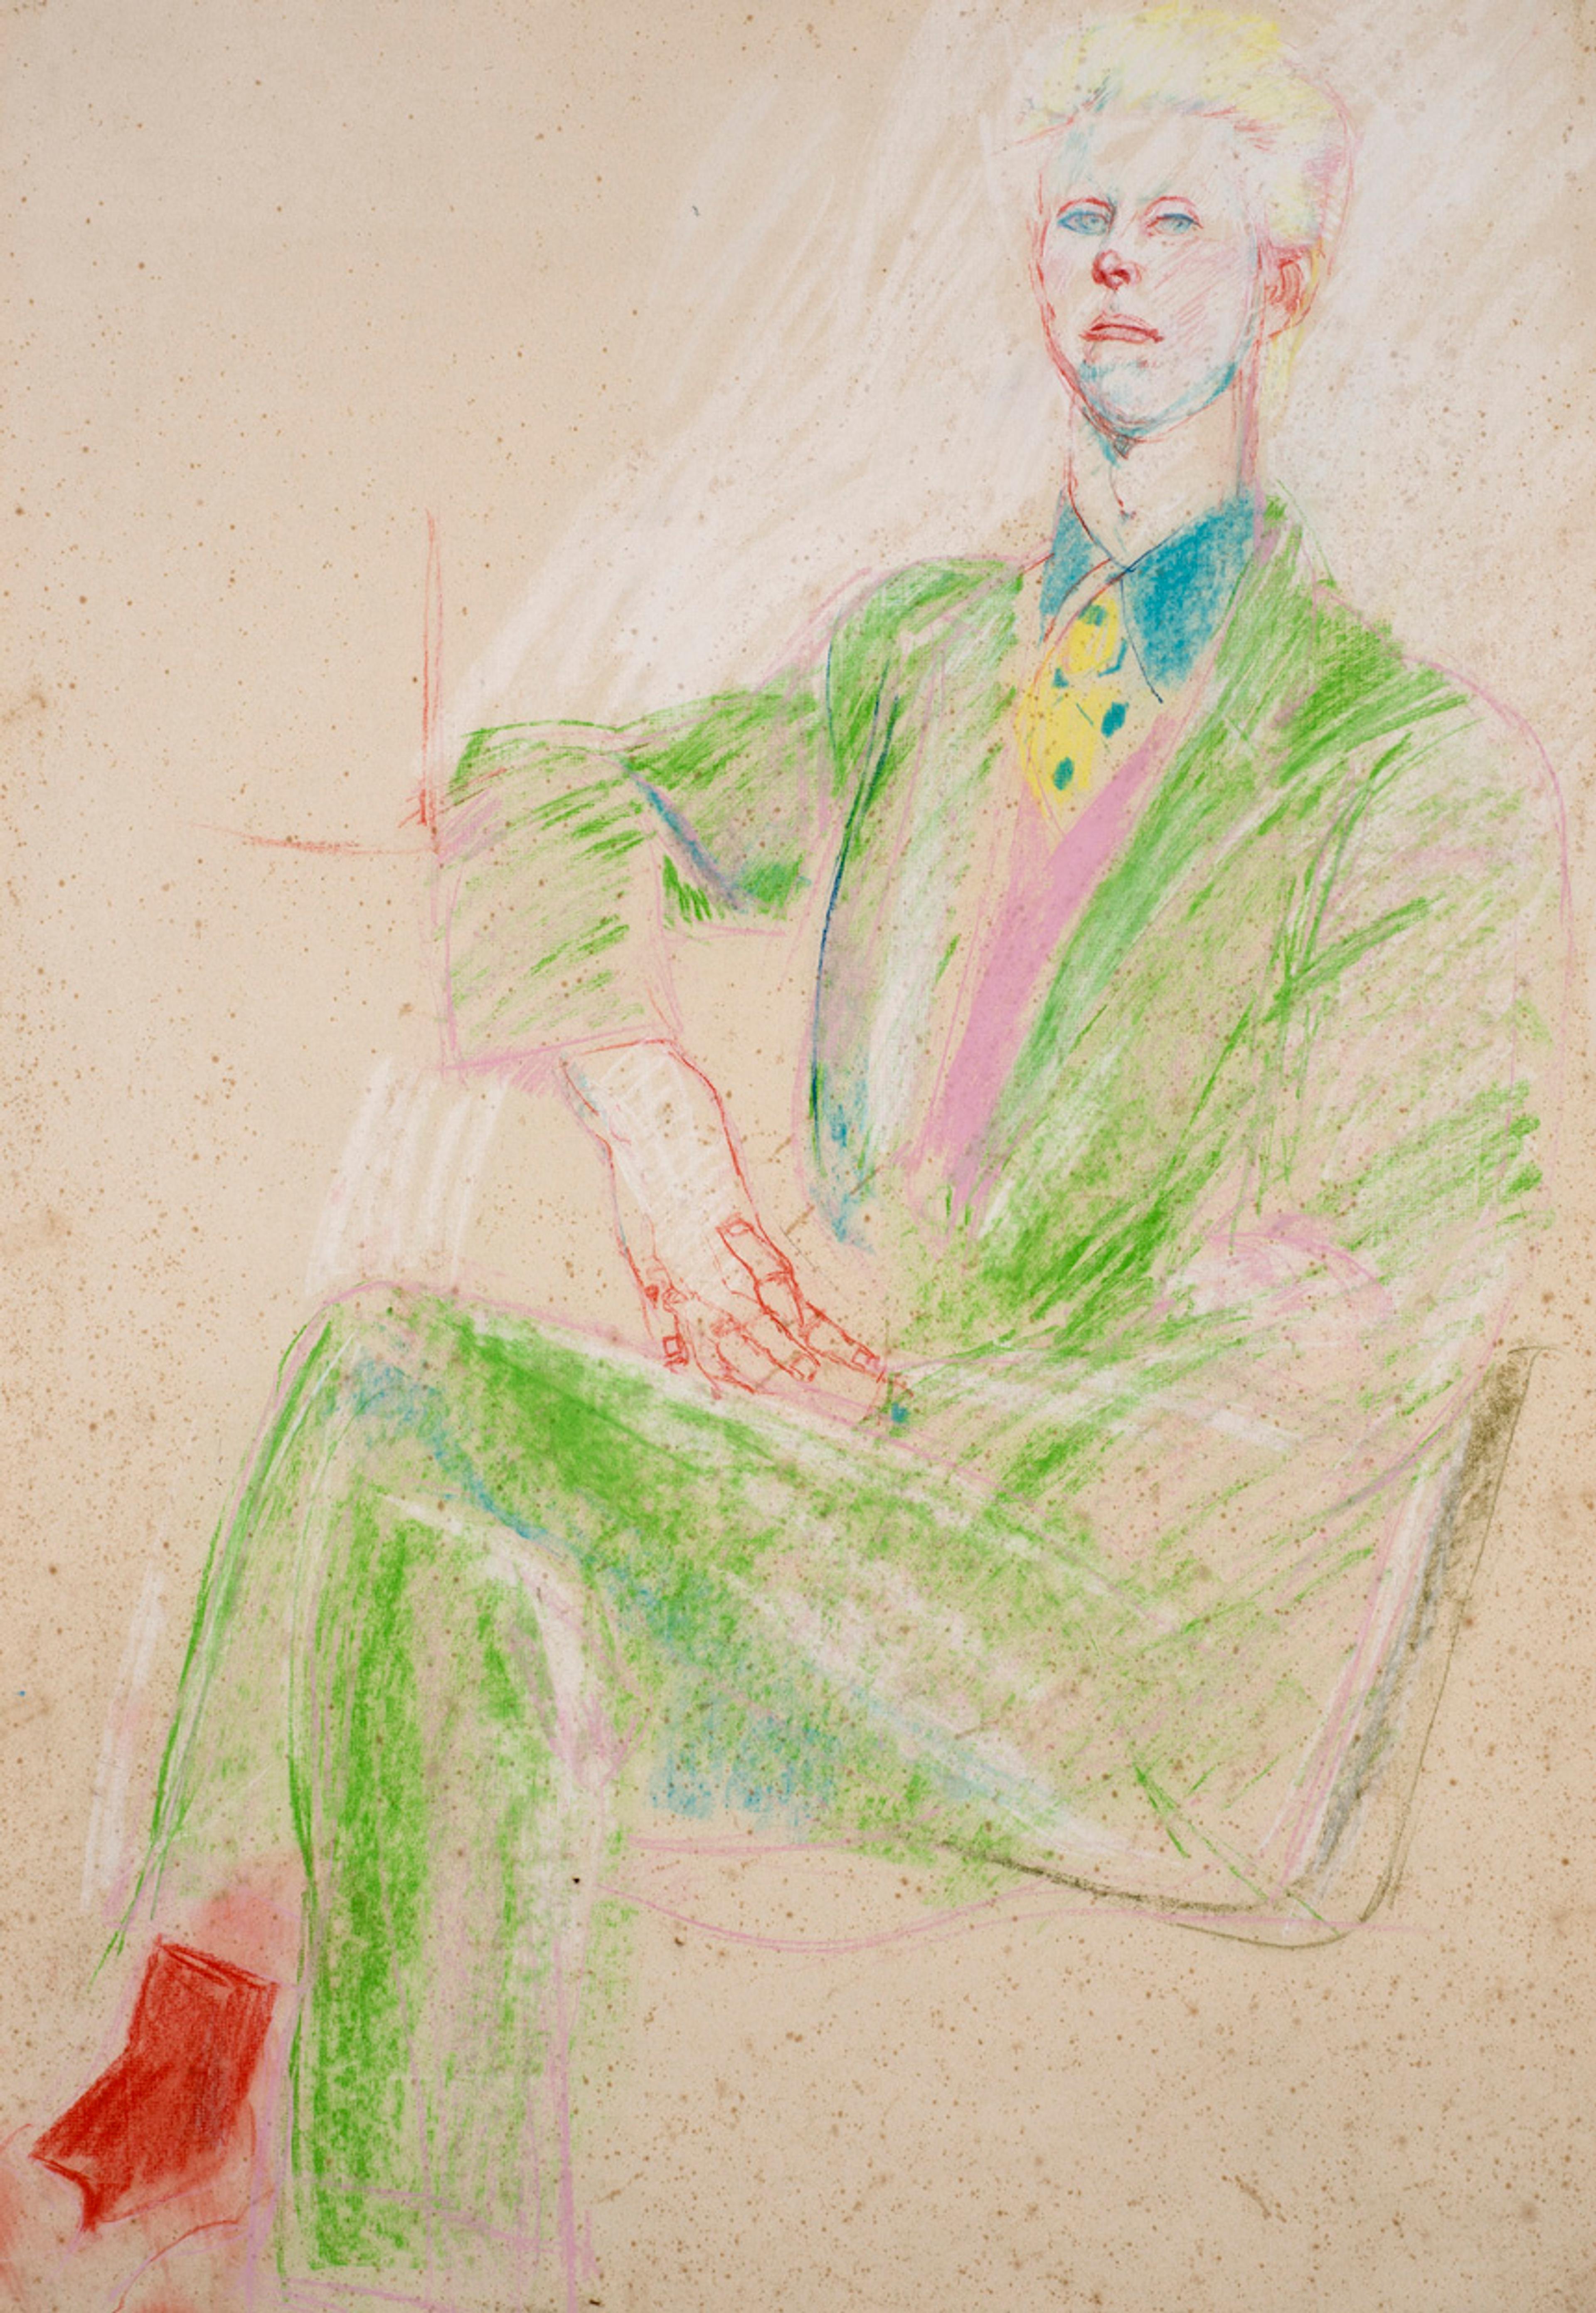 Drawing of a man with short blond hair sitting with his legs crossed, wearing a light green suit, blue shirt and yellow and blue necktie